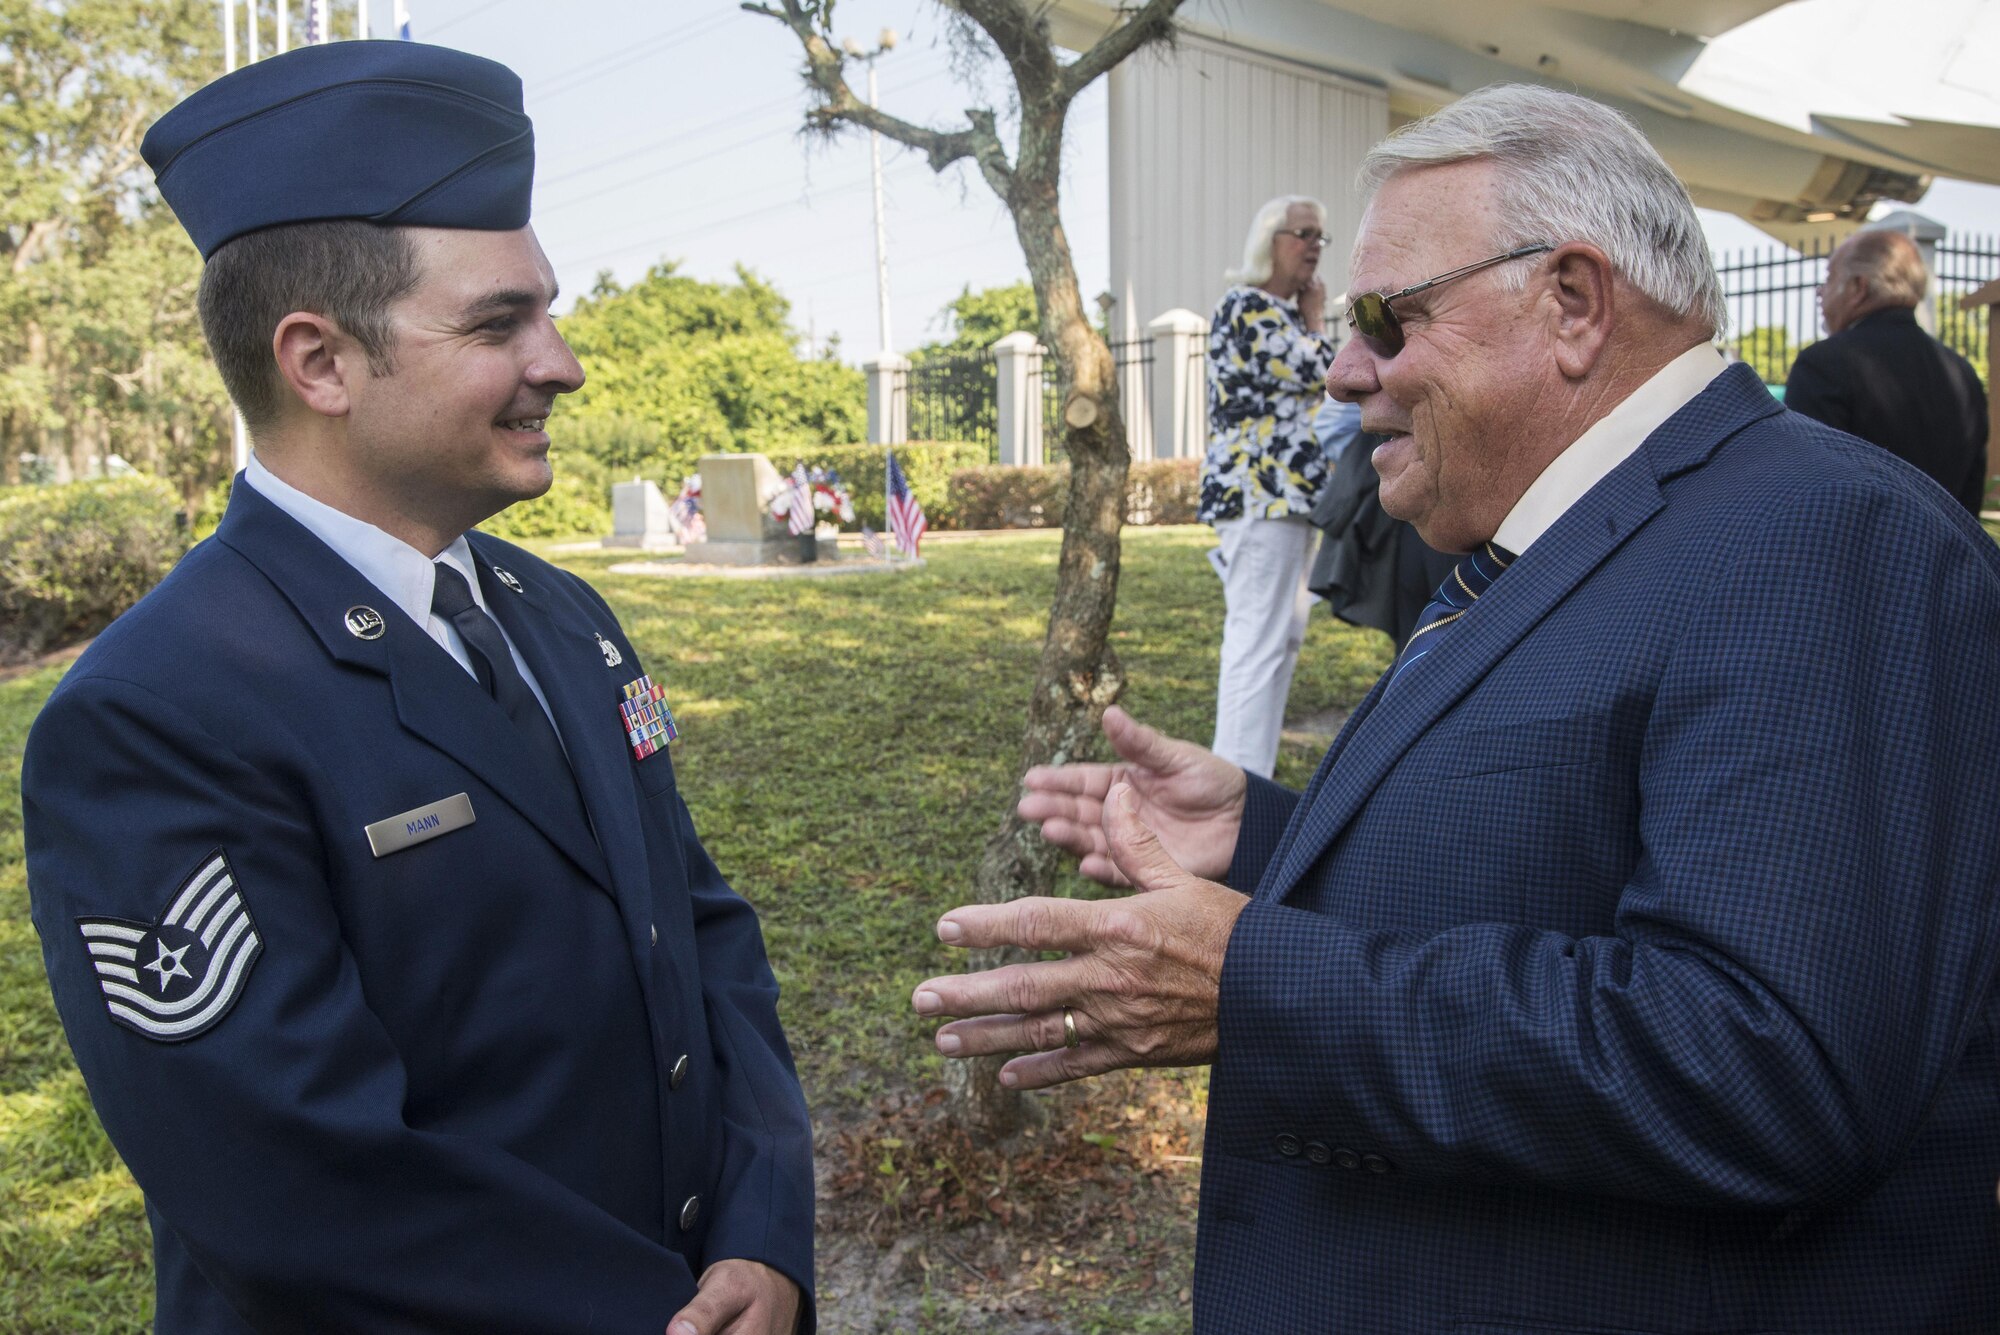 Tech. Sgt. Jody Mann, 33rd Aircraft Maintenance Squadron crew chief, speaks to James Wetmore, step father of Airman 1st Class Brian McVeigh, at an aircraft rededication ceremony June 14, 2016, at Memorial Park in DeBary Fla. McVeigh was a member of the 33rd Fighter Wing and native of Debary who was killed in the Khobar Towers terrorist attack in 1996. (U.S. Air Force photo by Senior Airman Stormy Archer/Released)